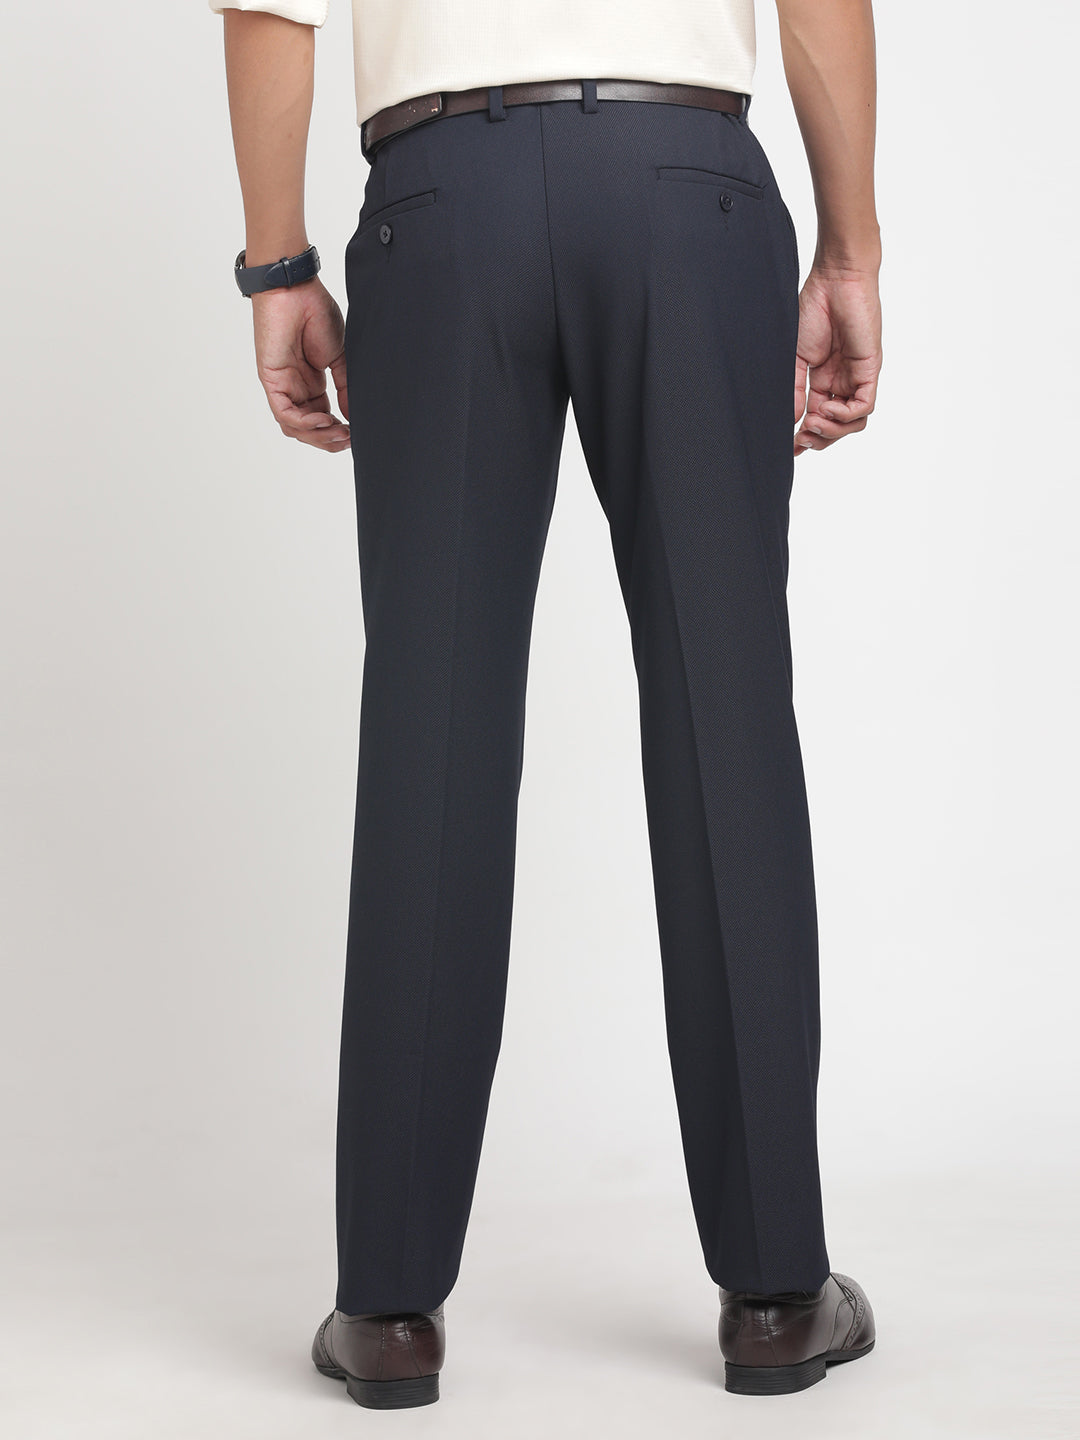 Cotton Stretch Navy Blue Dobby Ultra Slim Fit Flat Front Formal Trouser